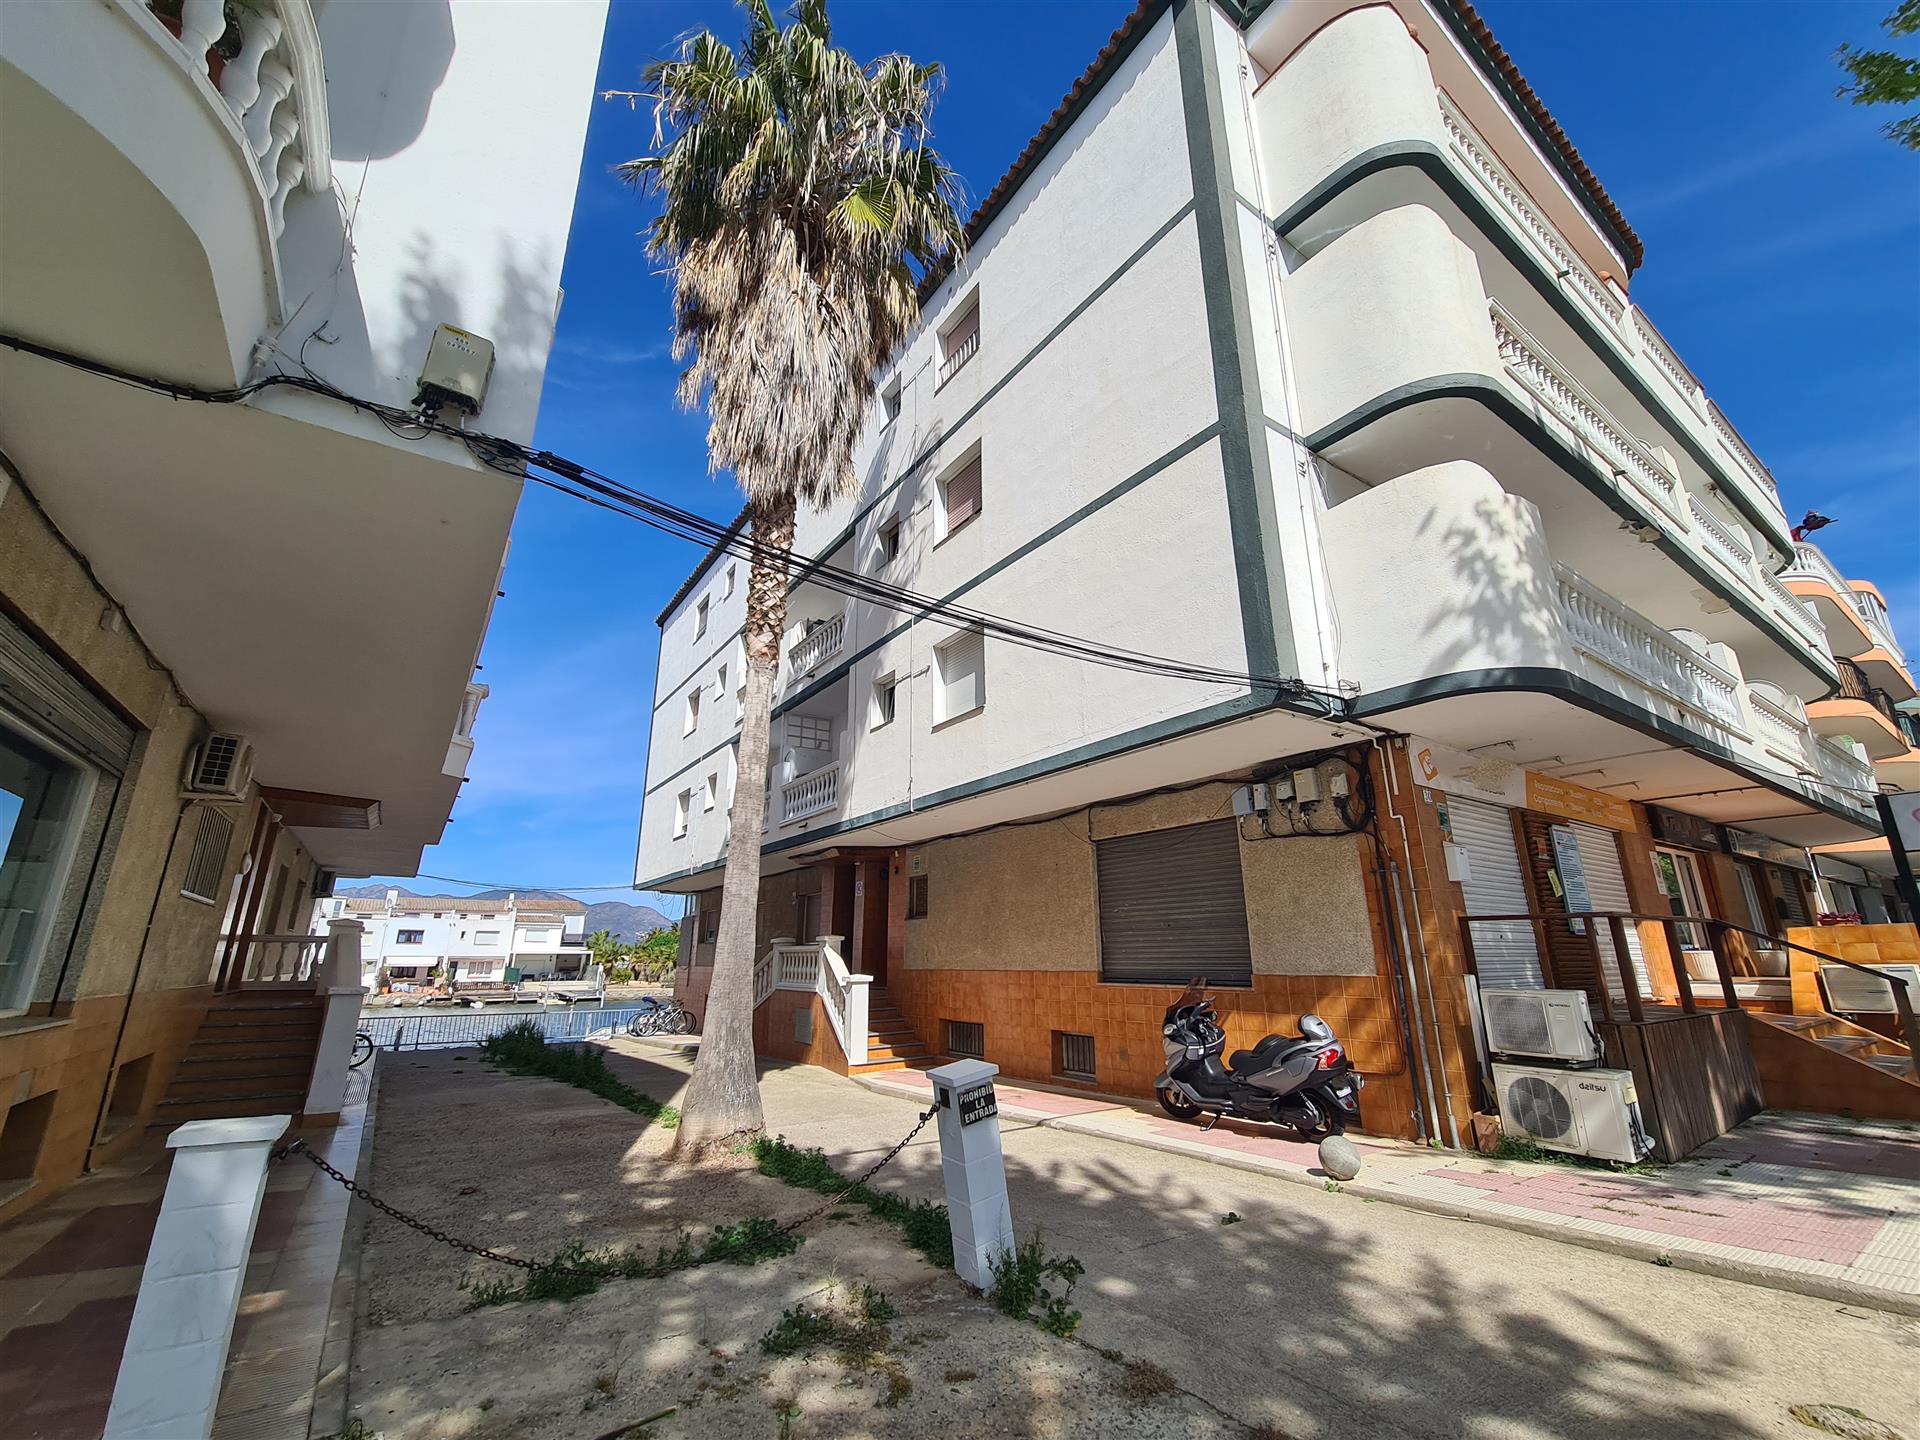 3-Bedrooms apartment, 1km from the beach